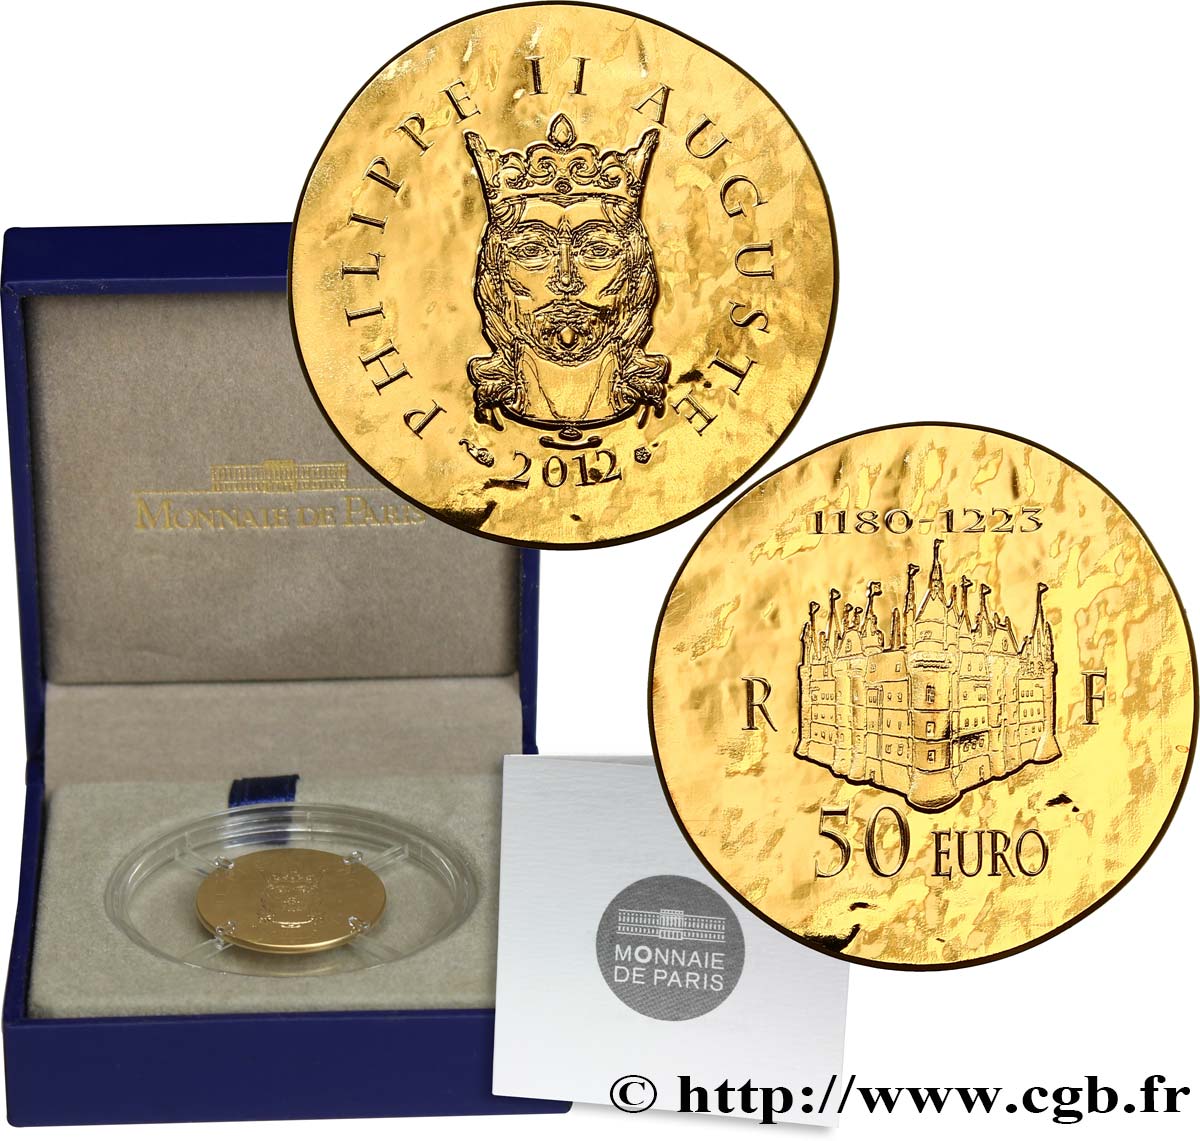 FRANCIA Belle Épreuve 50 Euro or PHILIPPE II AUGUSTE (1/4 once) 2012 FDC